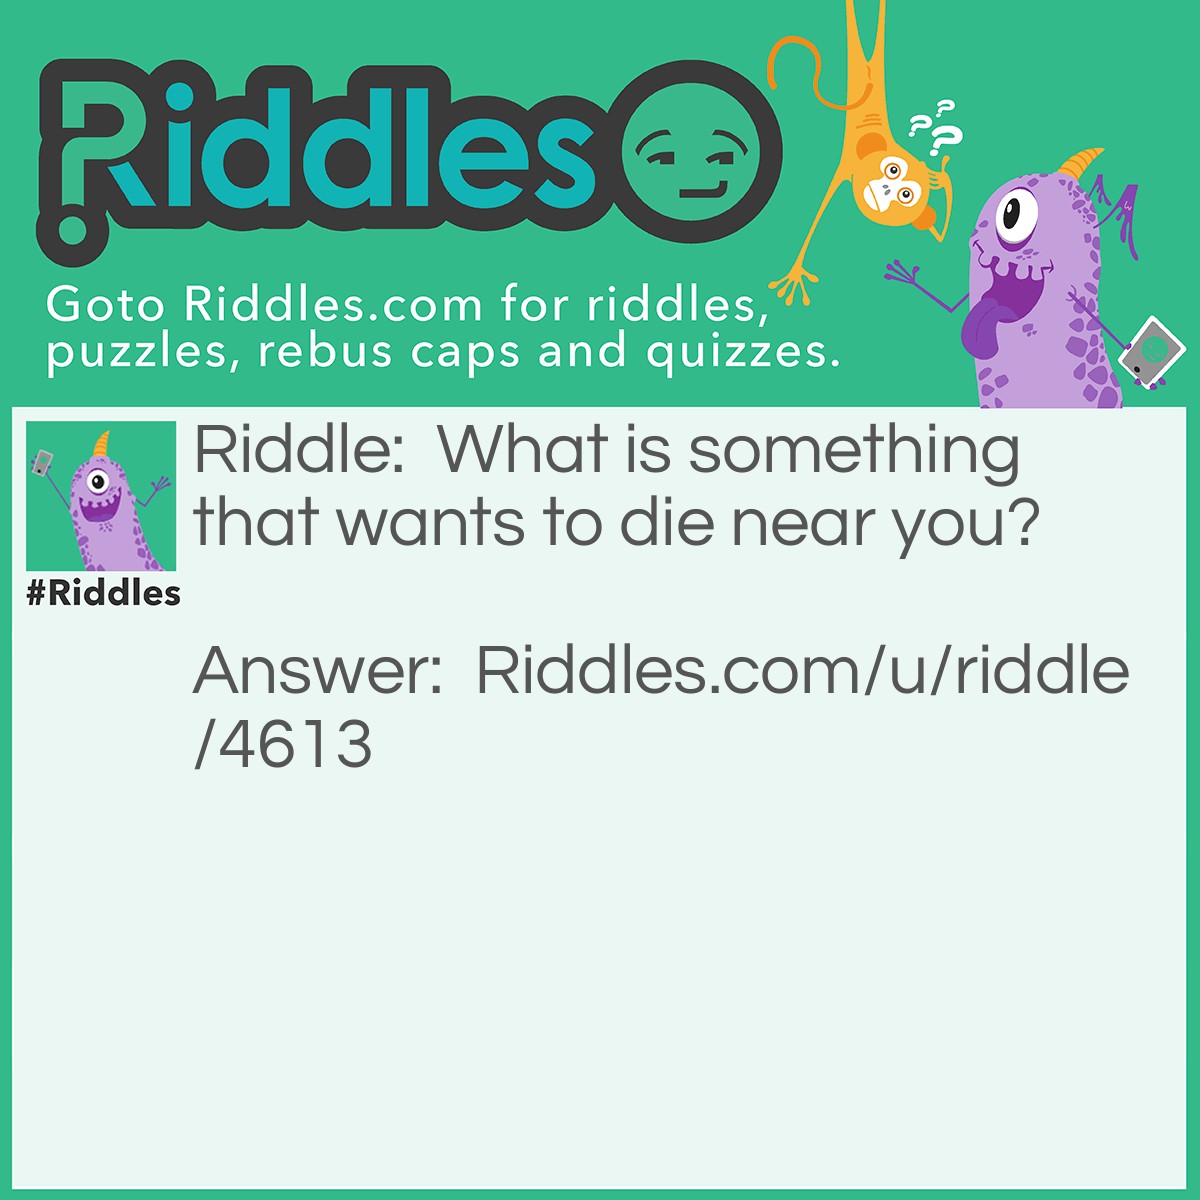 Riddle: What is something that wants to die near you? Answer: A mine. (Needs to kill itself and not having someone detonate or deactivate it.